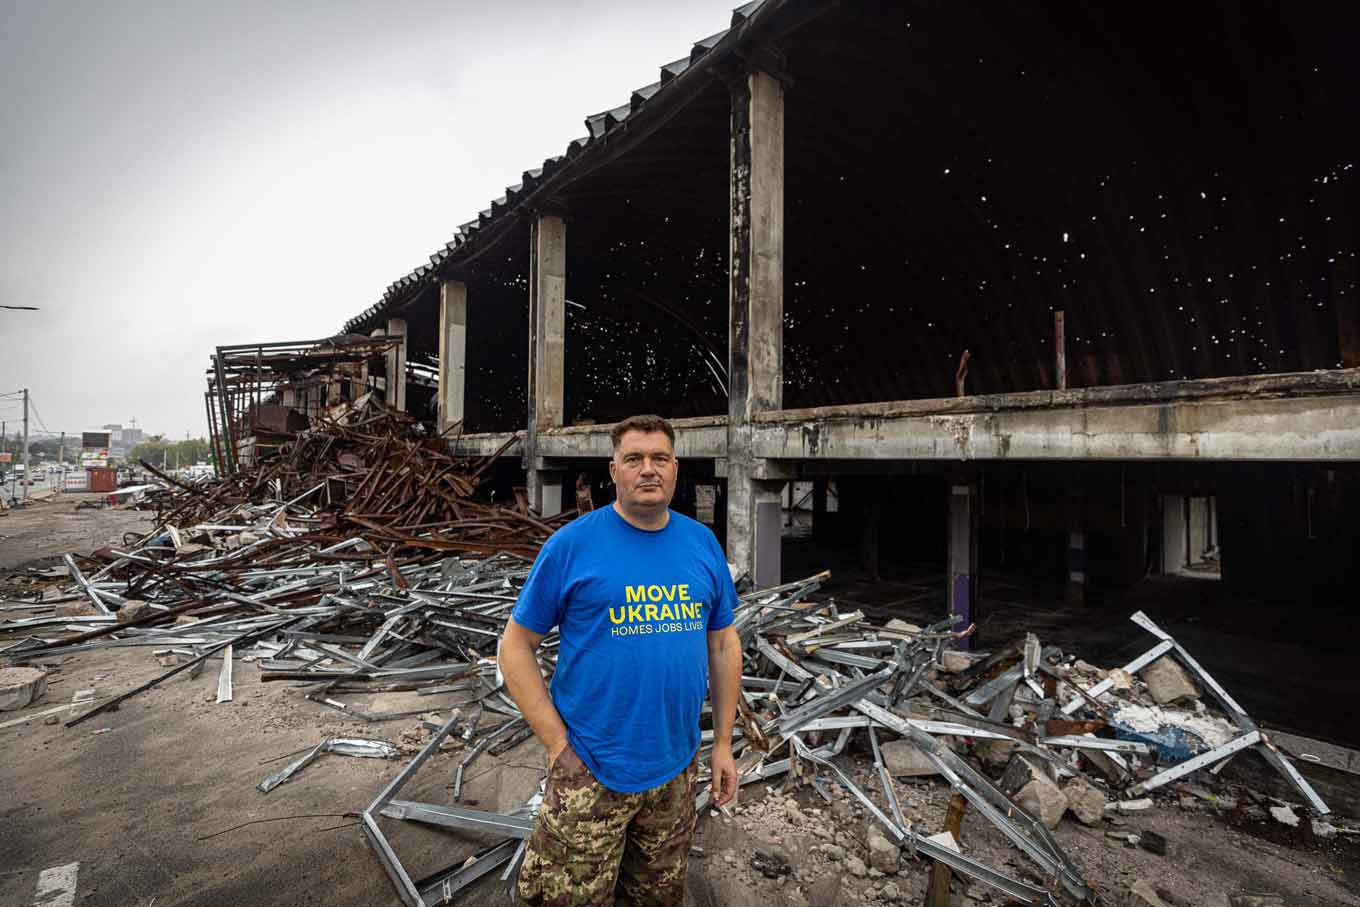 A MoveUkraine team member stands in front of a destroyed building